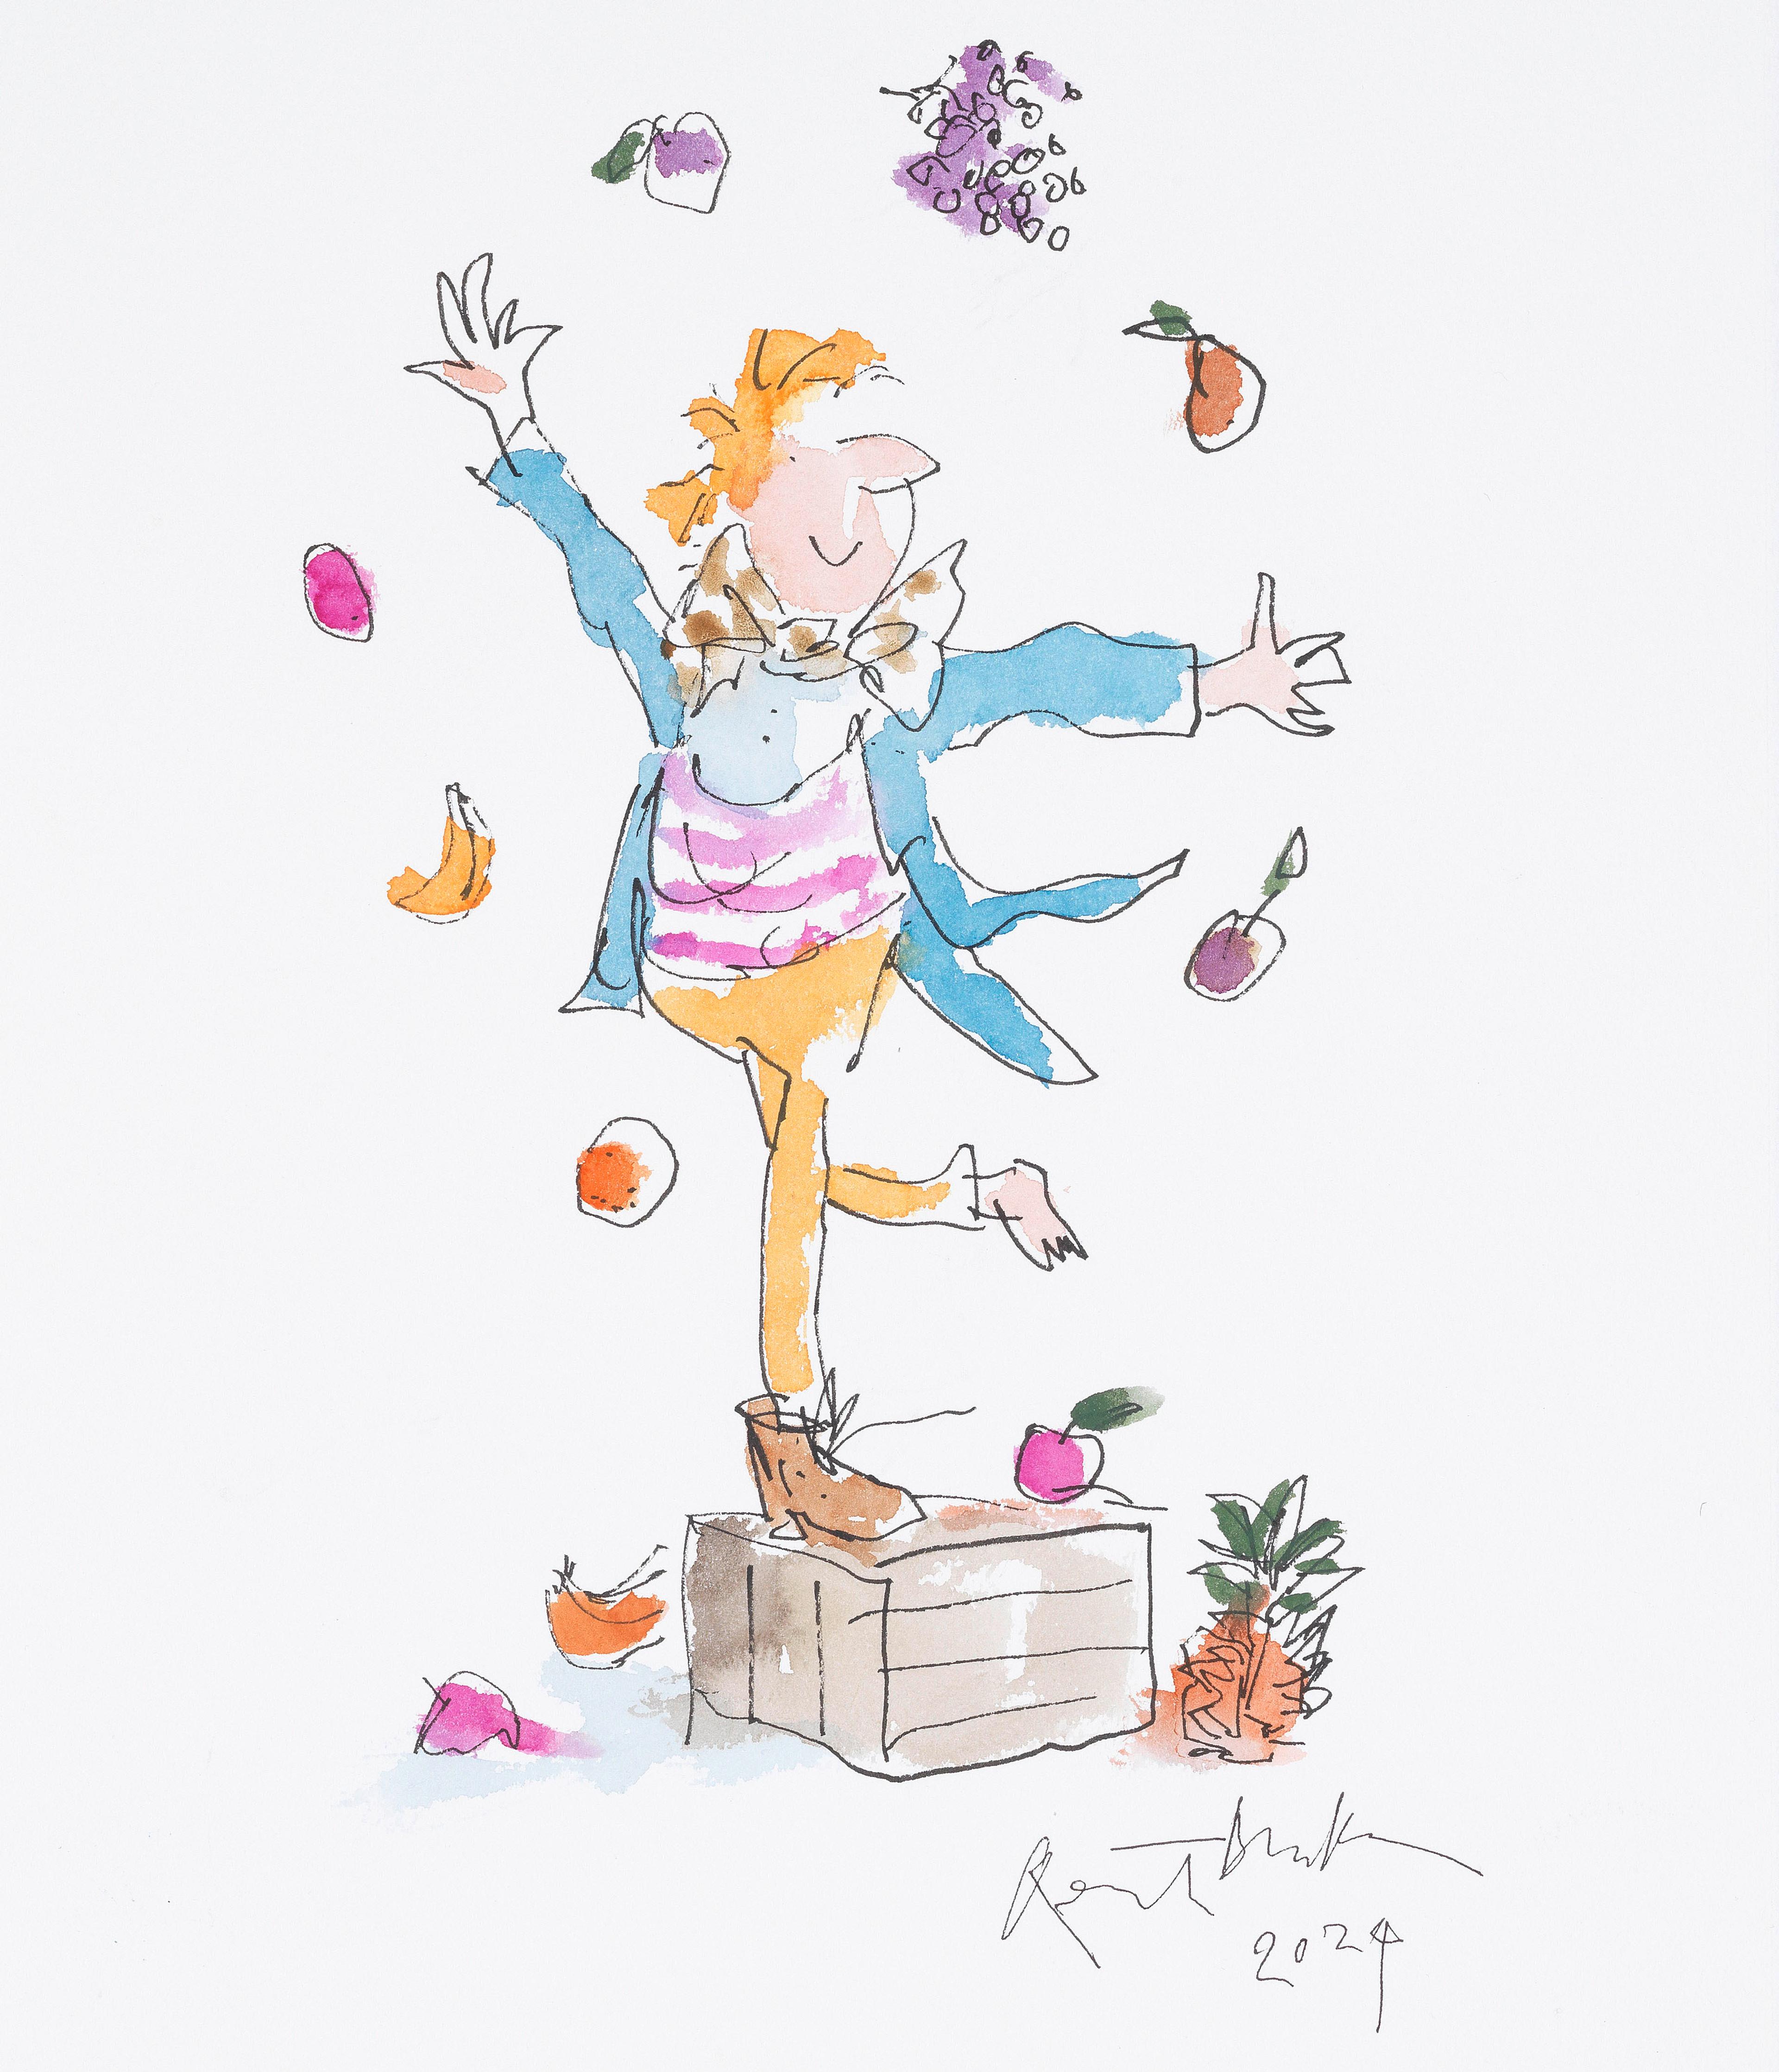 Illustration of a person wearing just one boot, they are standing on a crate and are juggling fruit and vegetables.